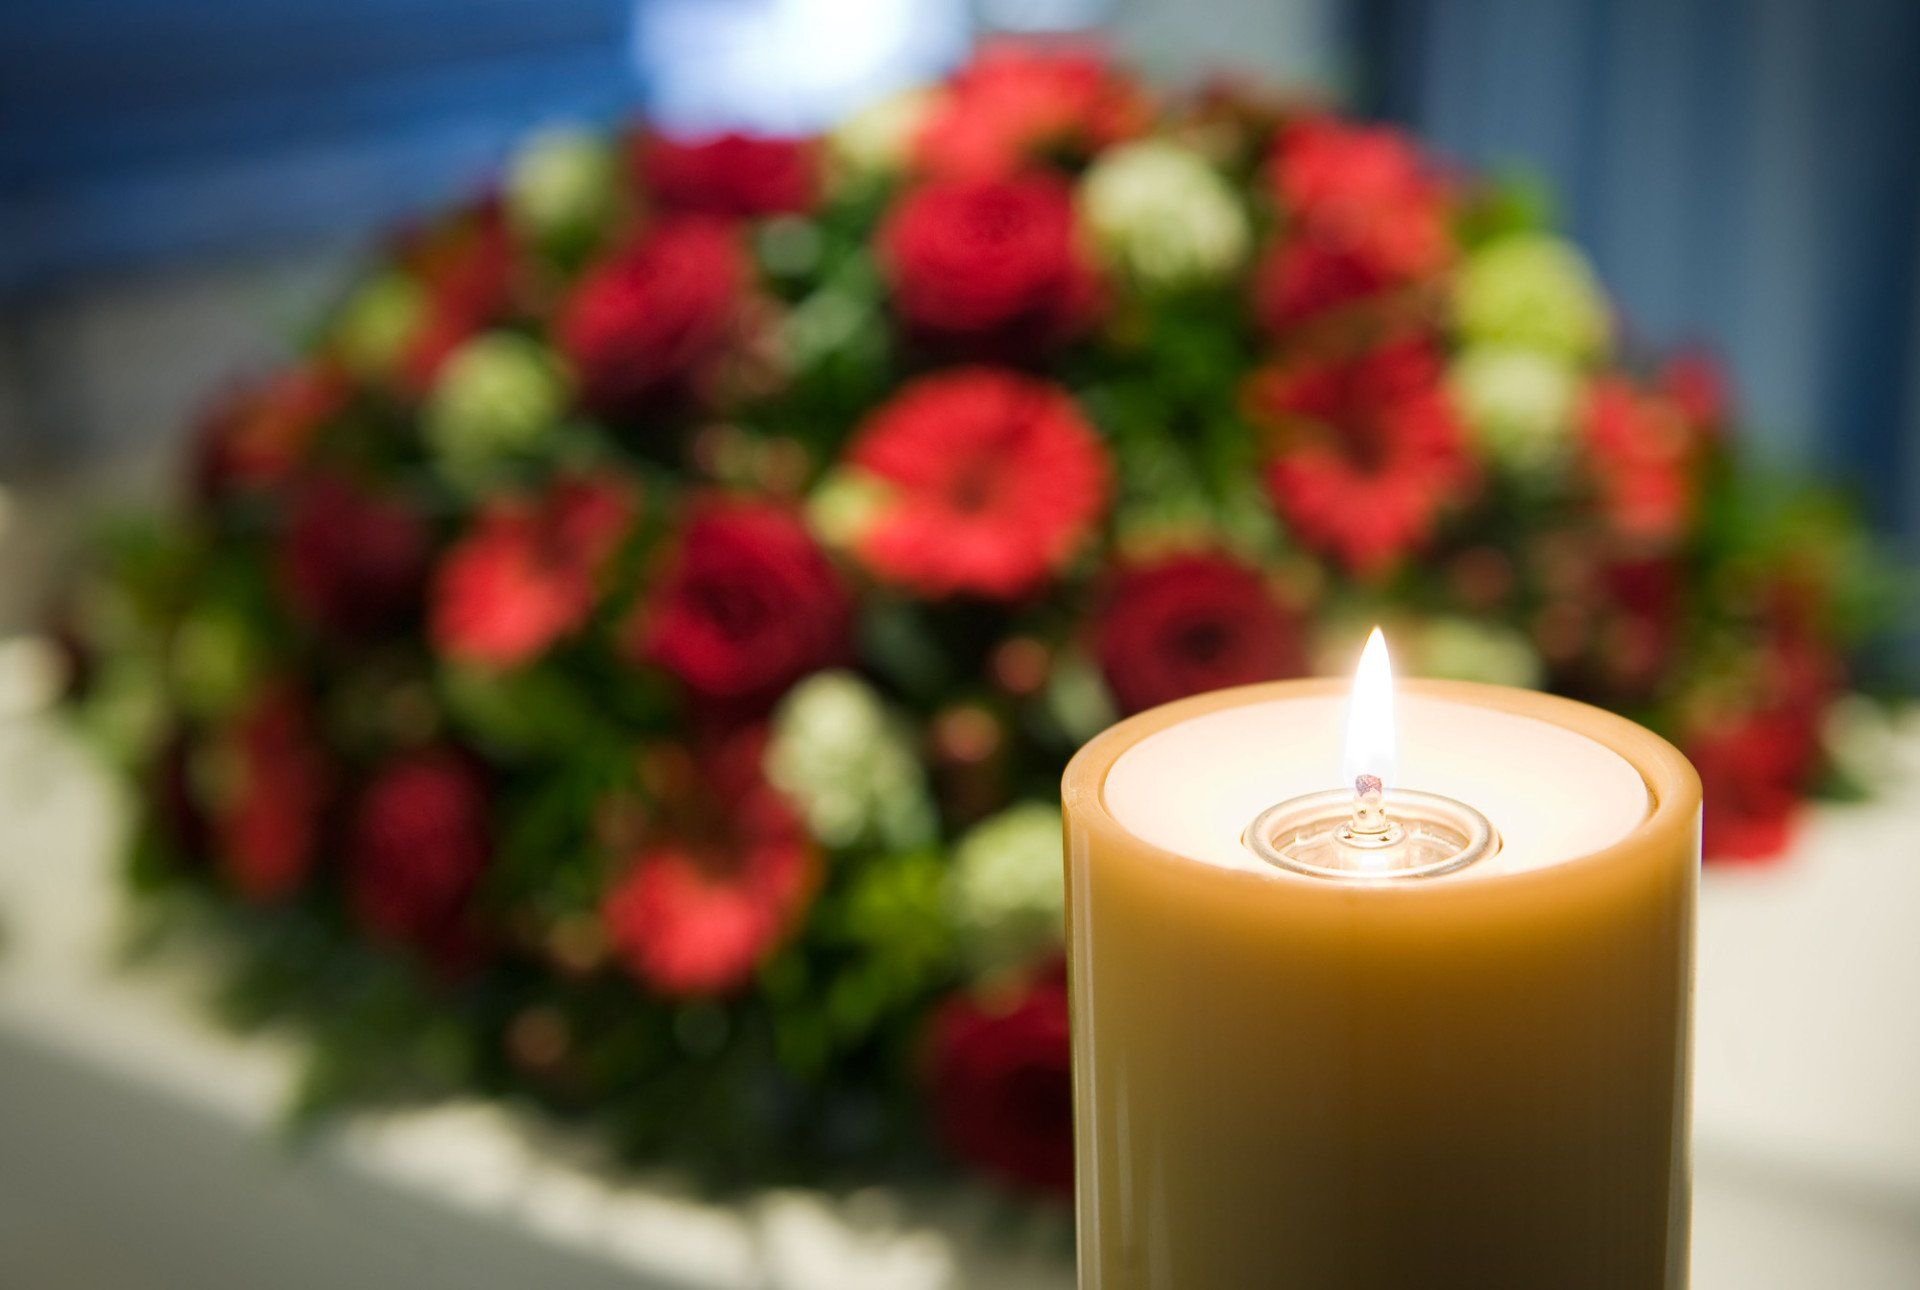 CREMATION SERVICES TO FIT YOUR FAMILY TRADITIONS